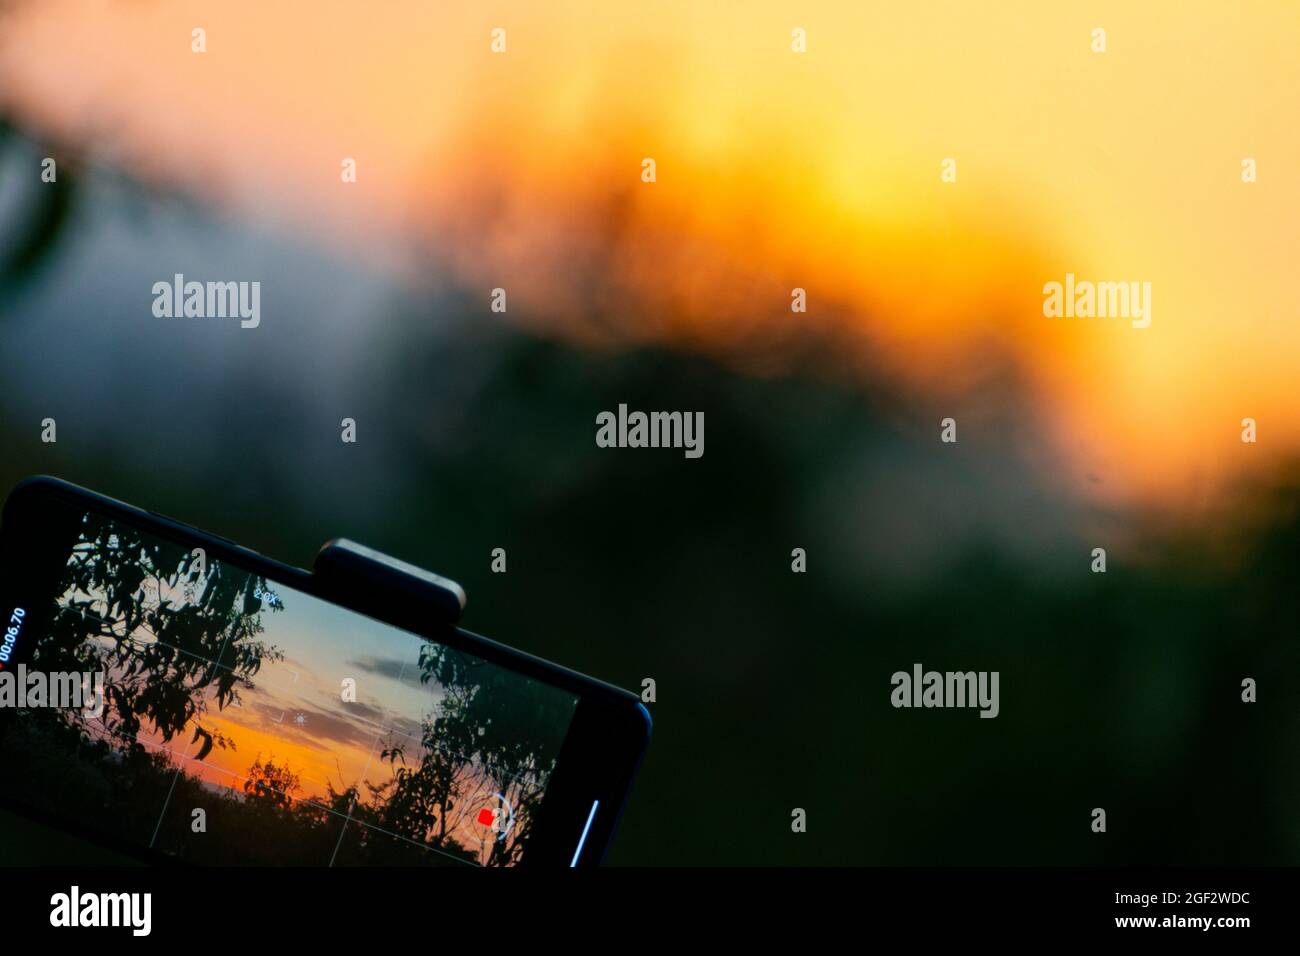 Photograph on a mobile phone while recording a sunset time lapse with a sun over the sky of Madrid, Spain. Europe. Horizontal photography. Stock Photo